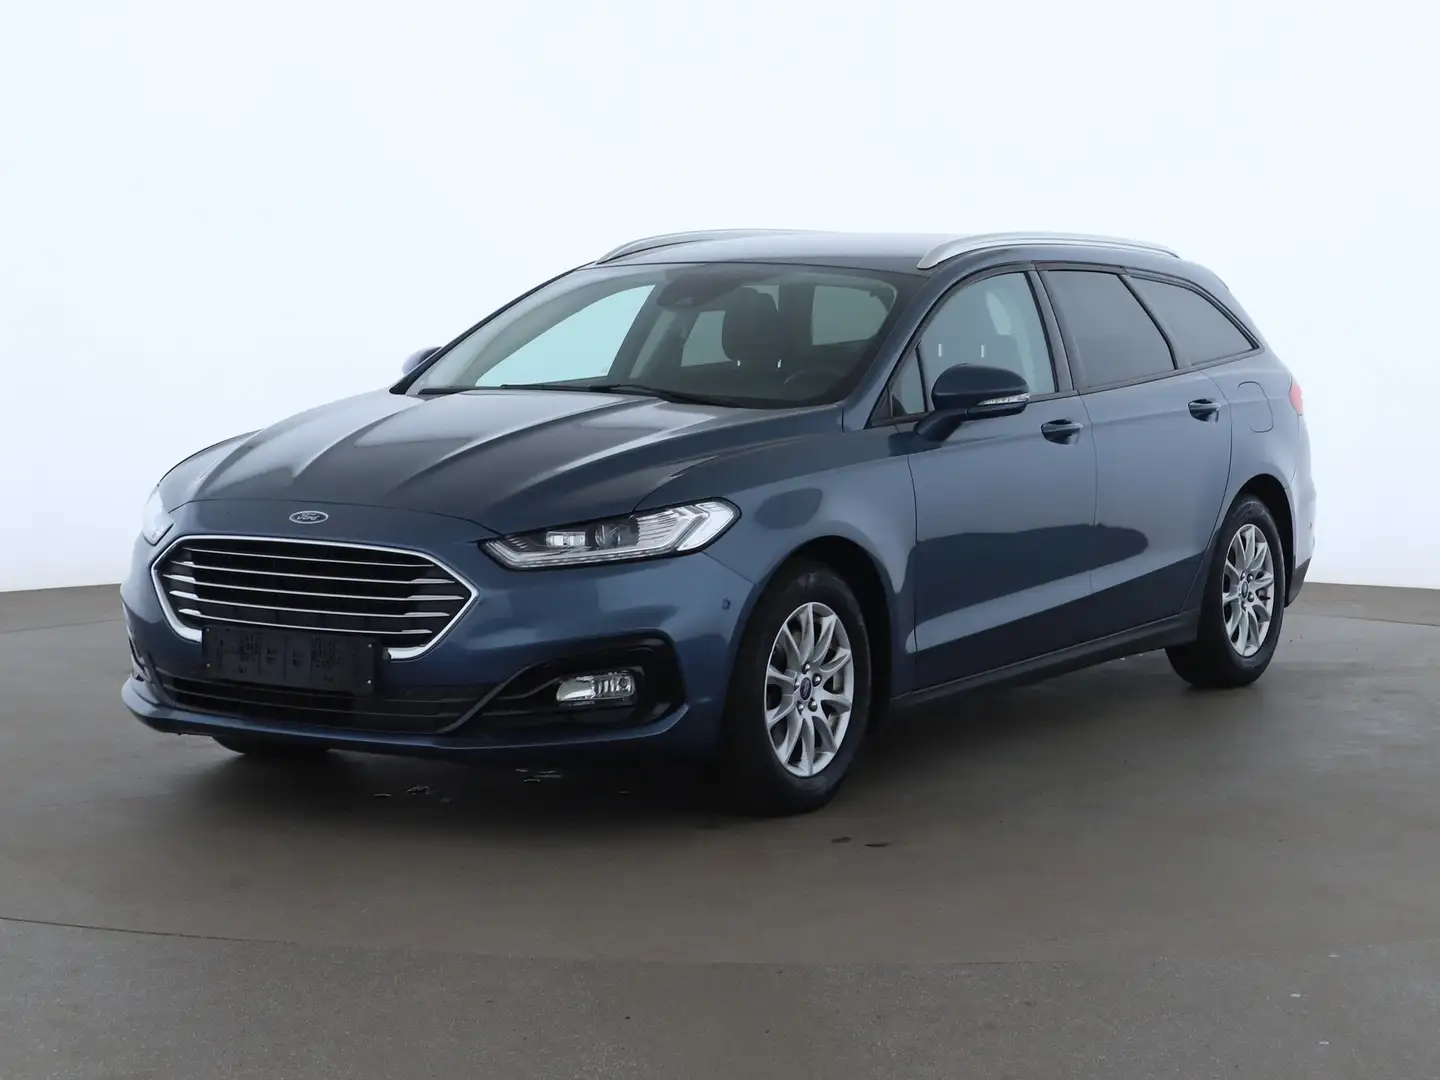 Ford Mondeo Turnier 1.5 Trend Business Edition STANDH. LED. Синій - 1